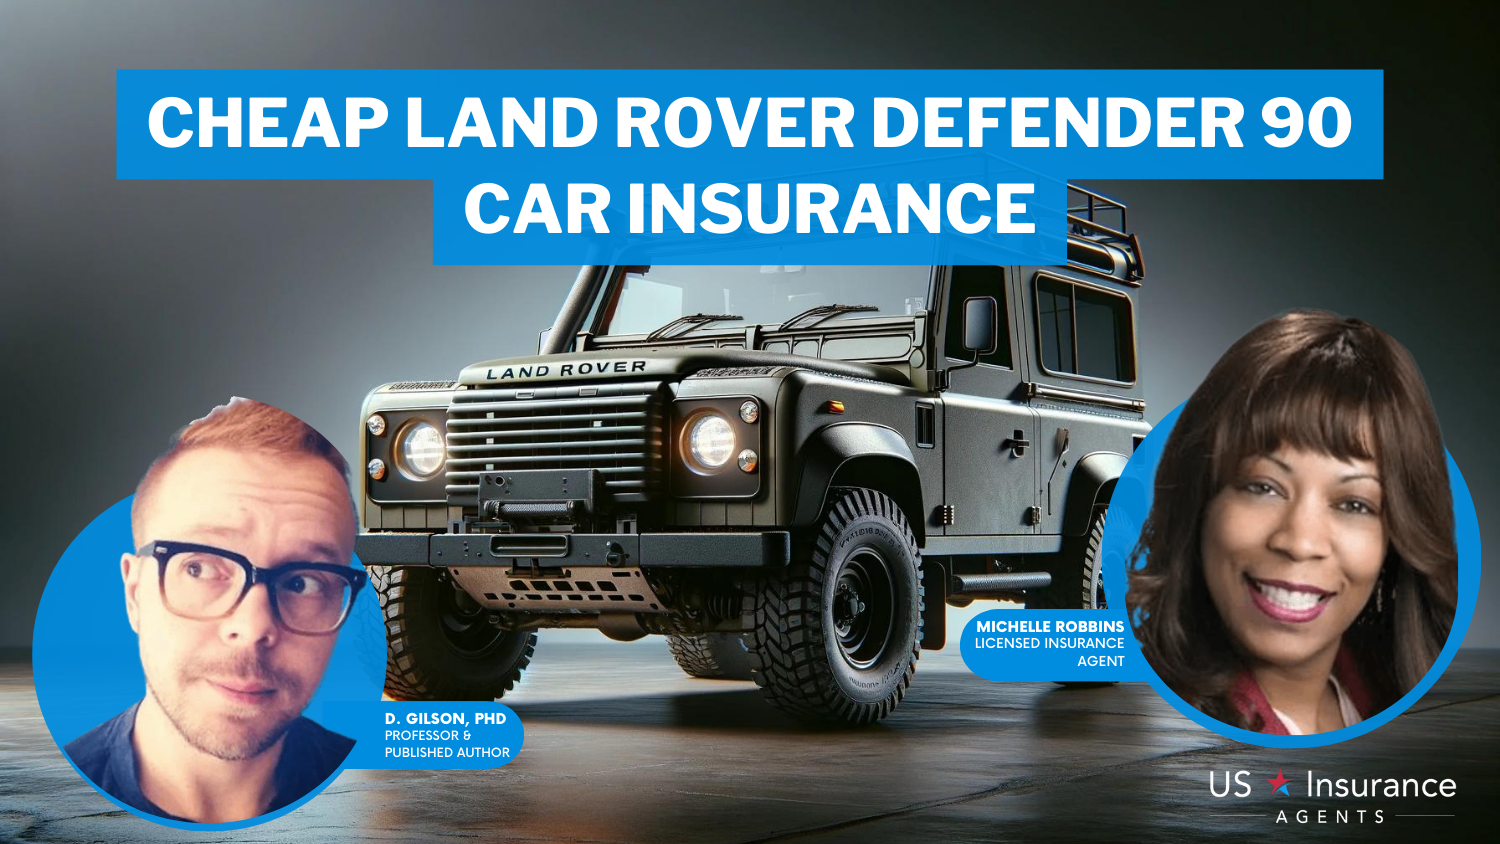 Cheap Land Rover Defender 90 Car Insurance: Safeco, AAA, and USAA